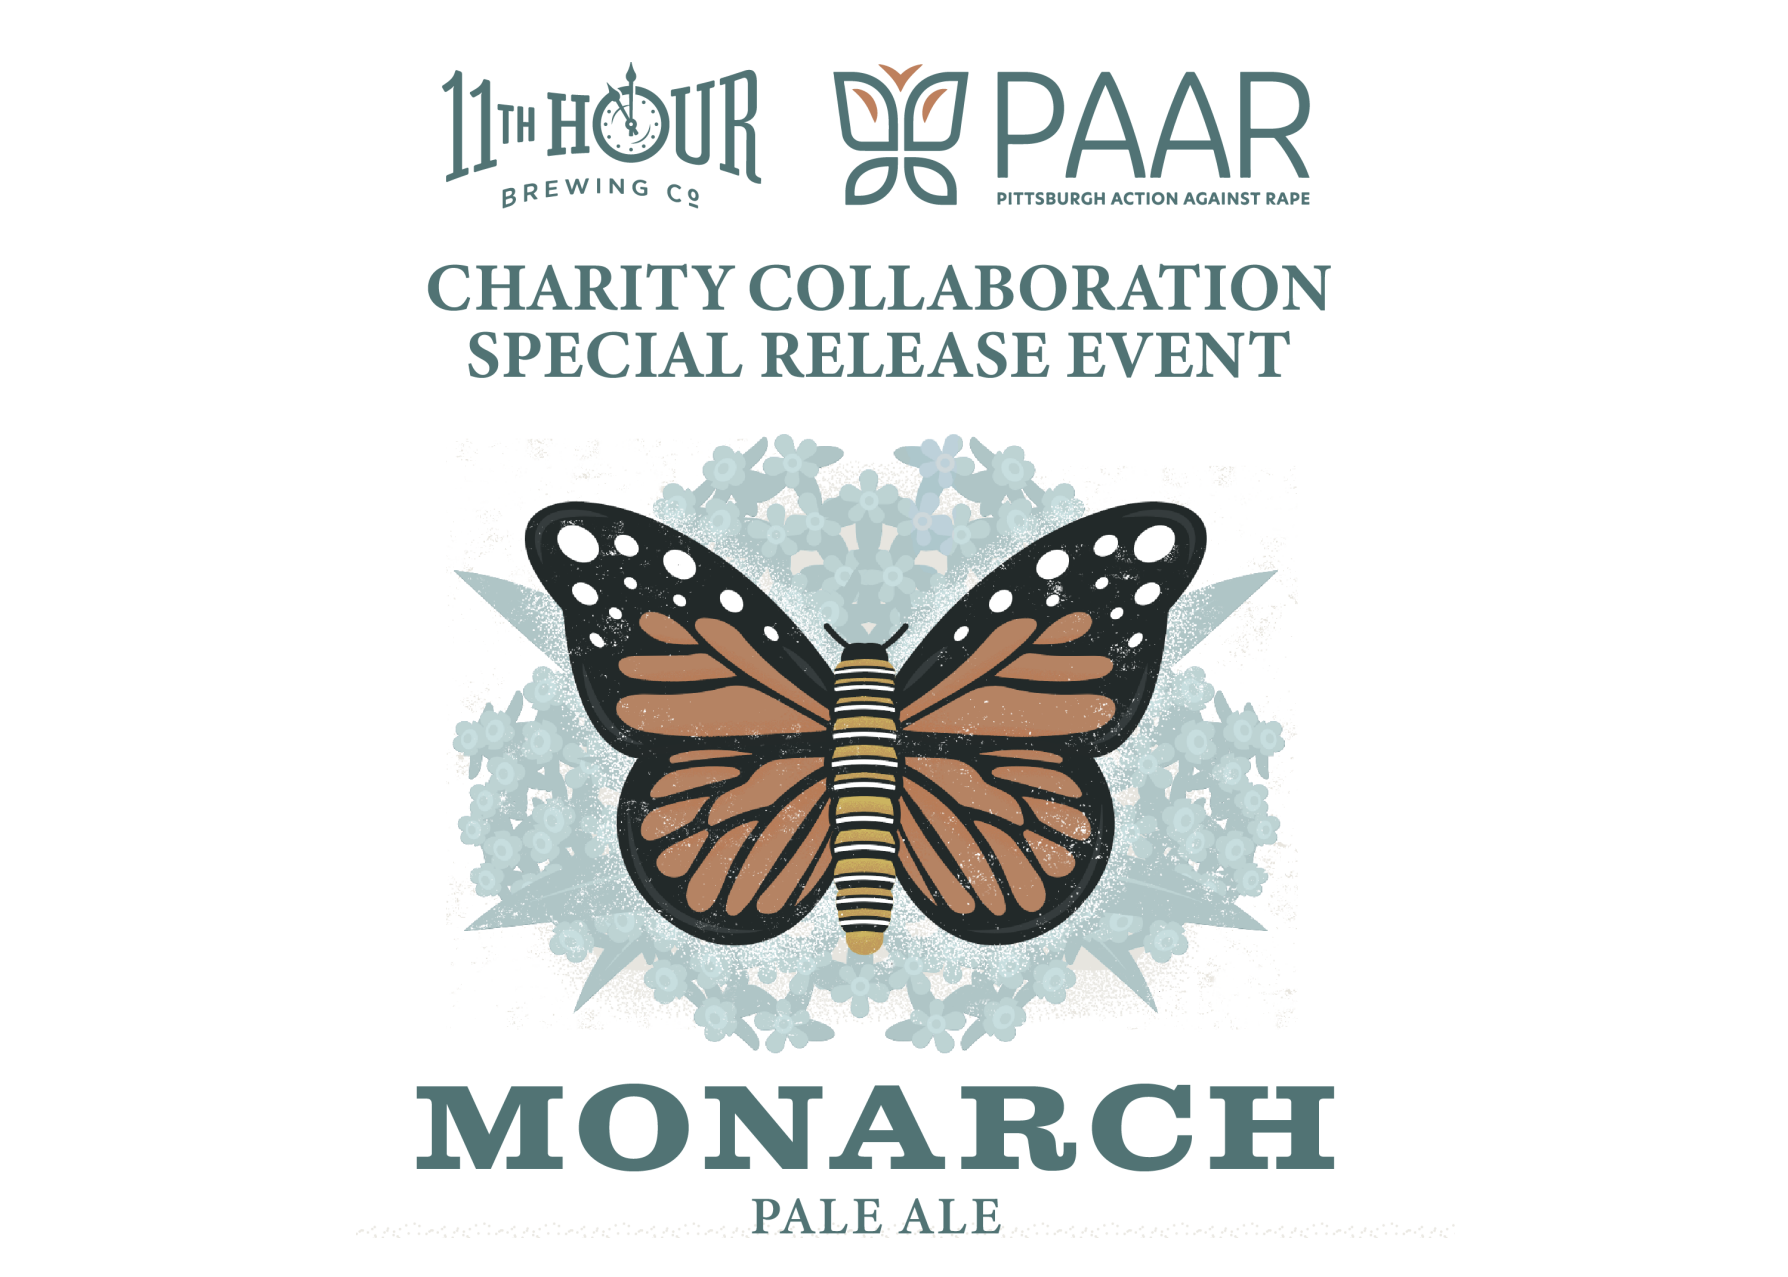 A graphic where 11th Hour Brewing Co.'s logo and PAAR's logo sit at the top against a white background. The text below reads, "Charity Collaboration Special Release Event." Underneath that is a graphic of a monarch butterfly, with text underneath: "Monarch Pale Ale".